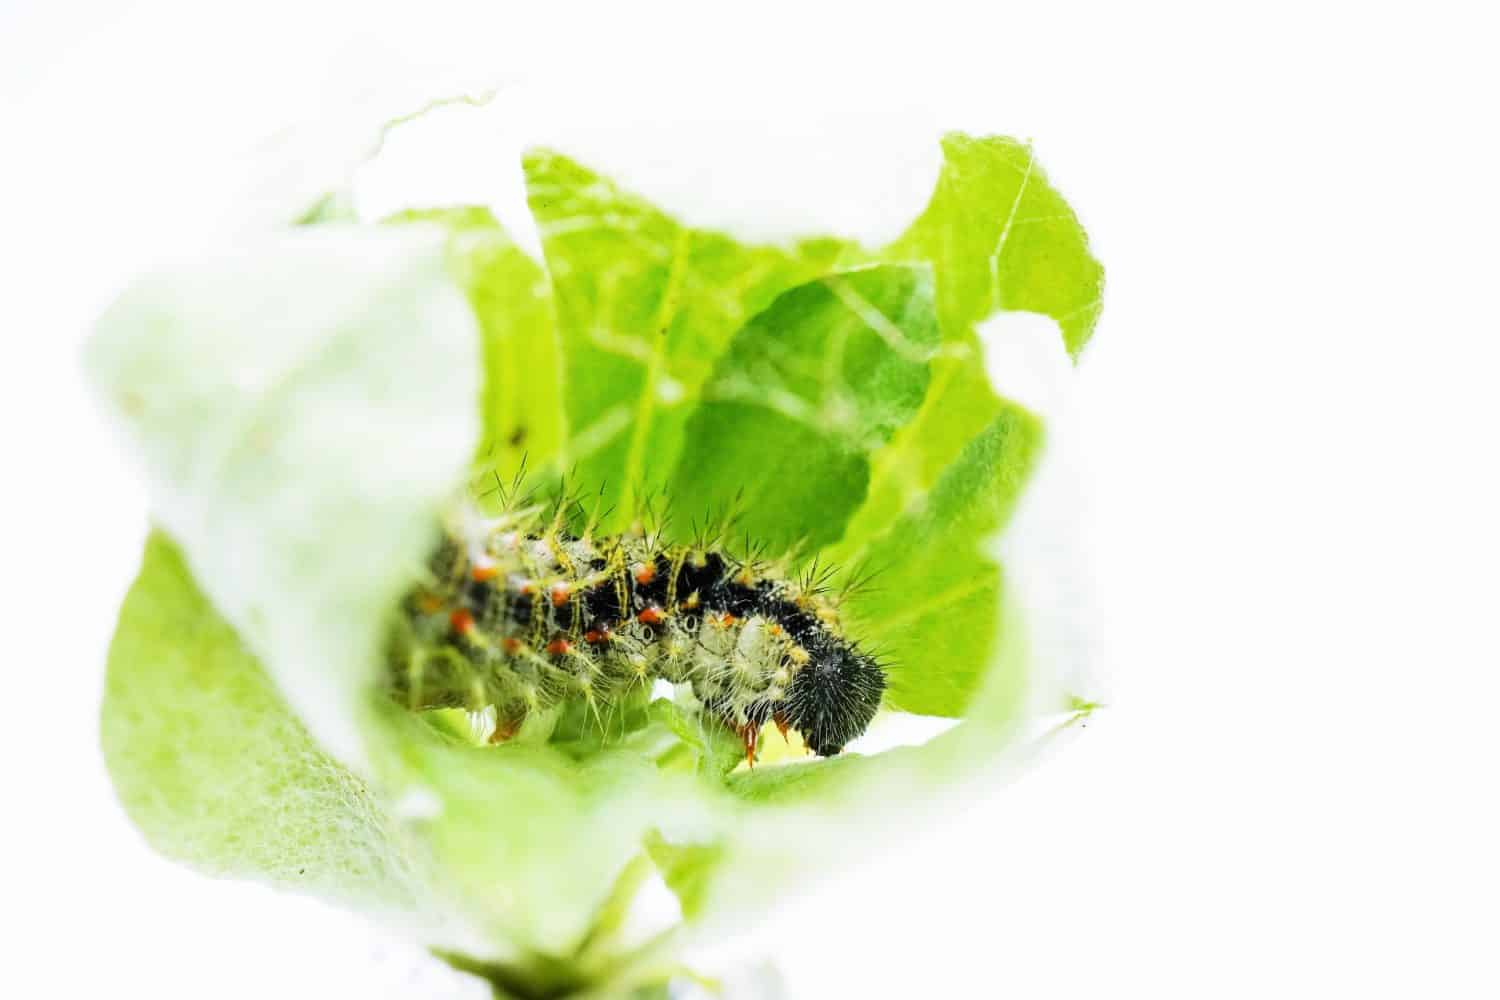 A larva of the Painted Lady butterfly collects and rolls up the leaves of Jersey Cudweed to build a nest on a white background